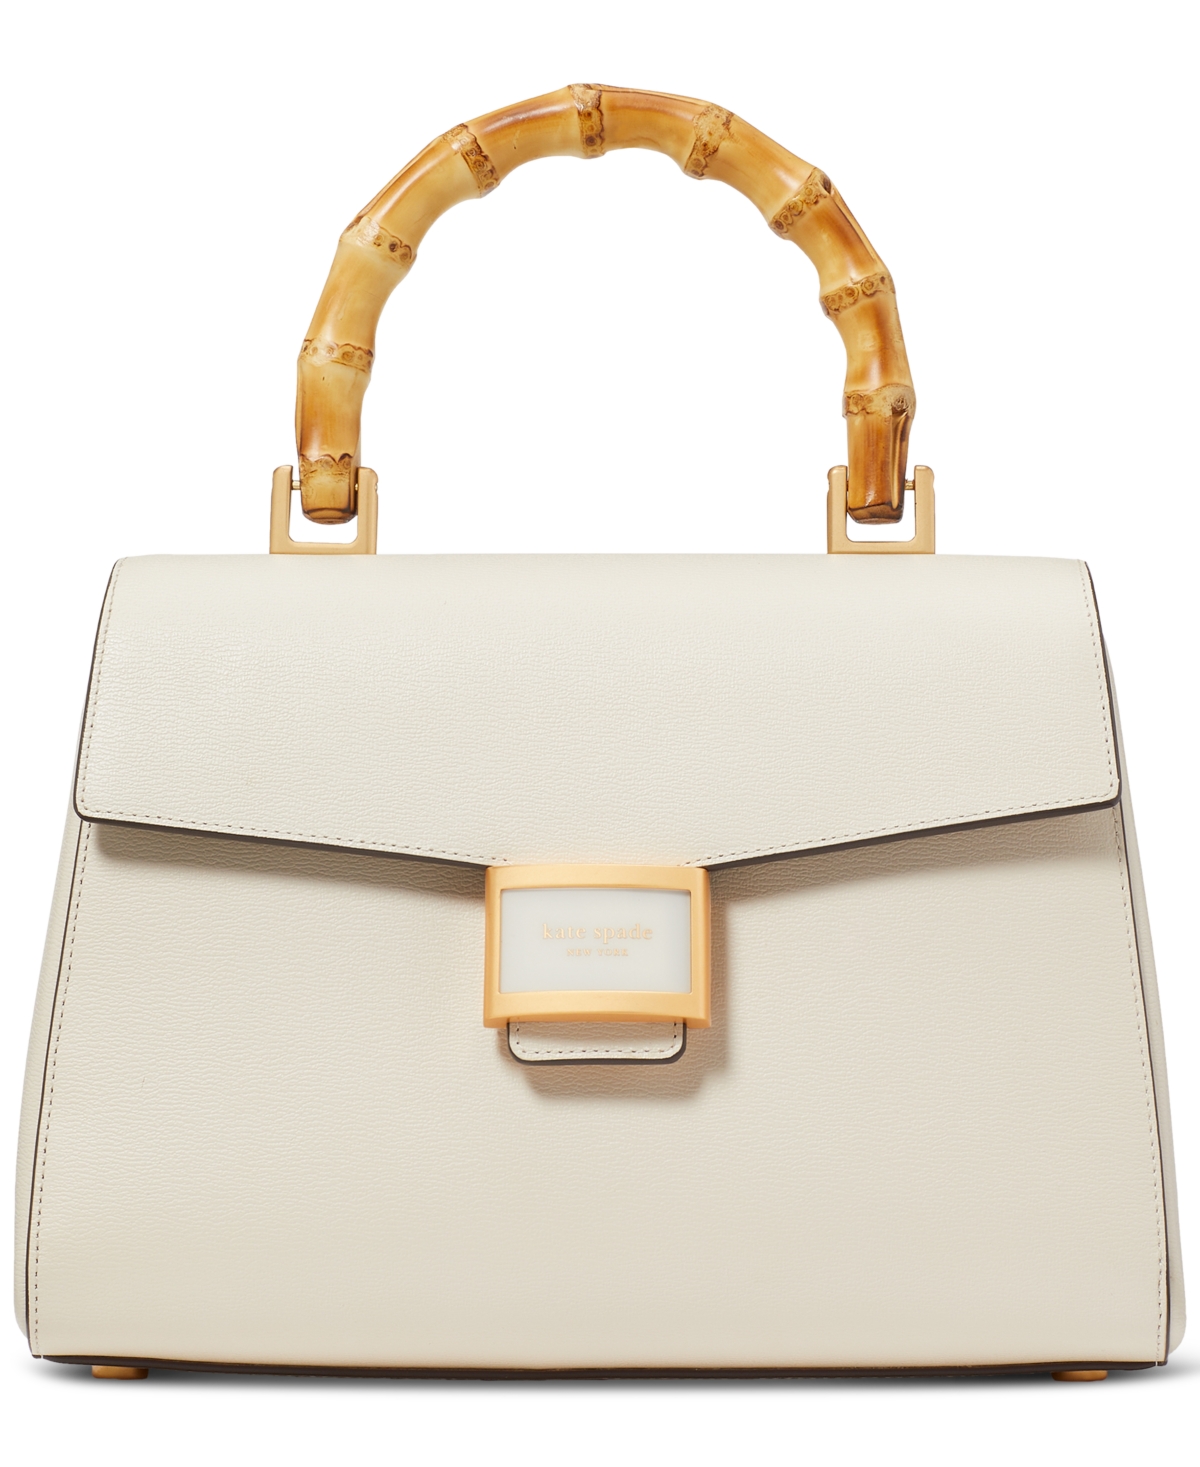 Katy Textured Leather Small Top Handle Bag - Summer Daffodil